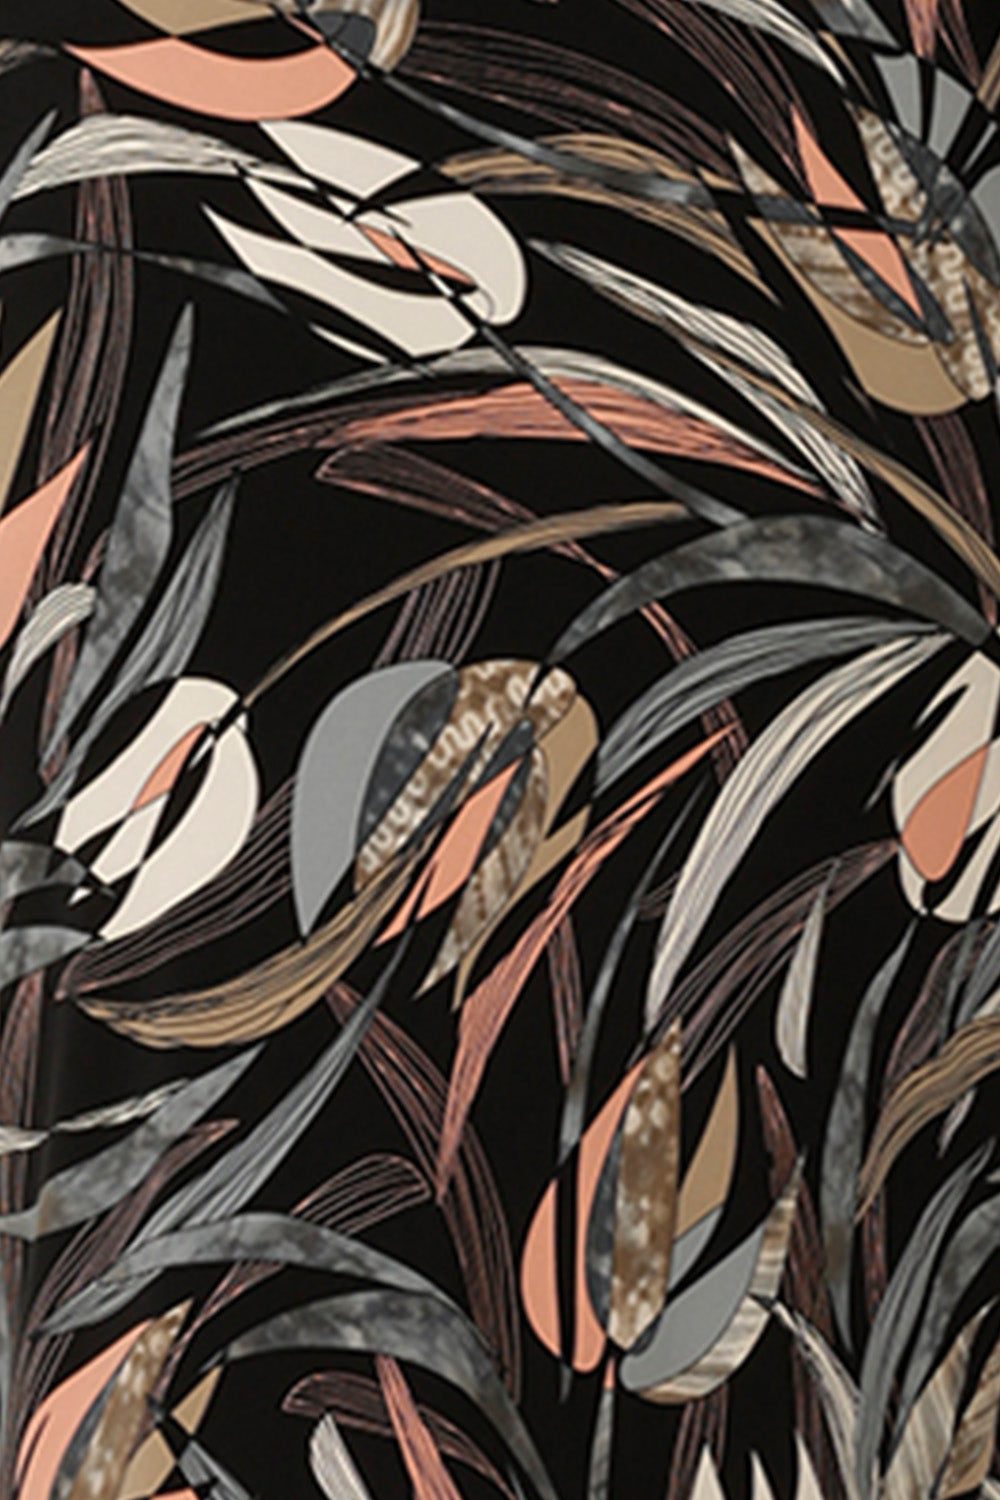 Dry Touch jersey fabric in 'Nouveau' floral print used by Australian and New Zealand women's clothing label to make a range of women's workwear dresses and tops.